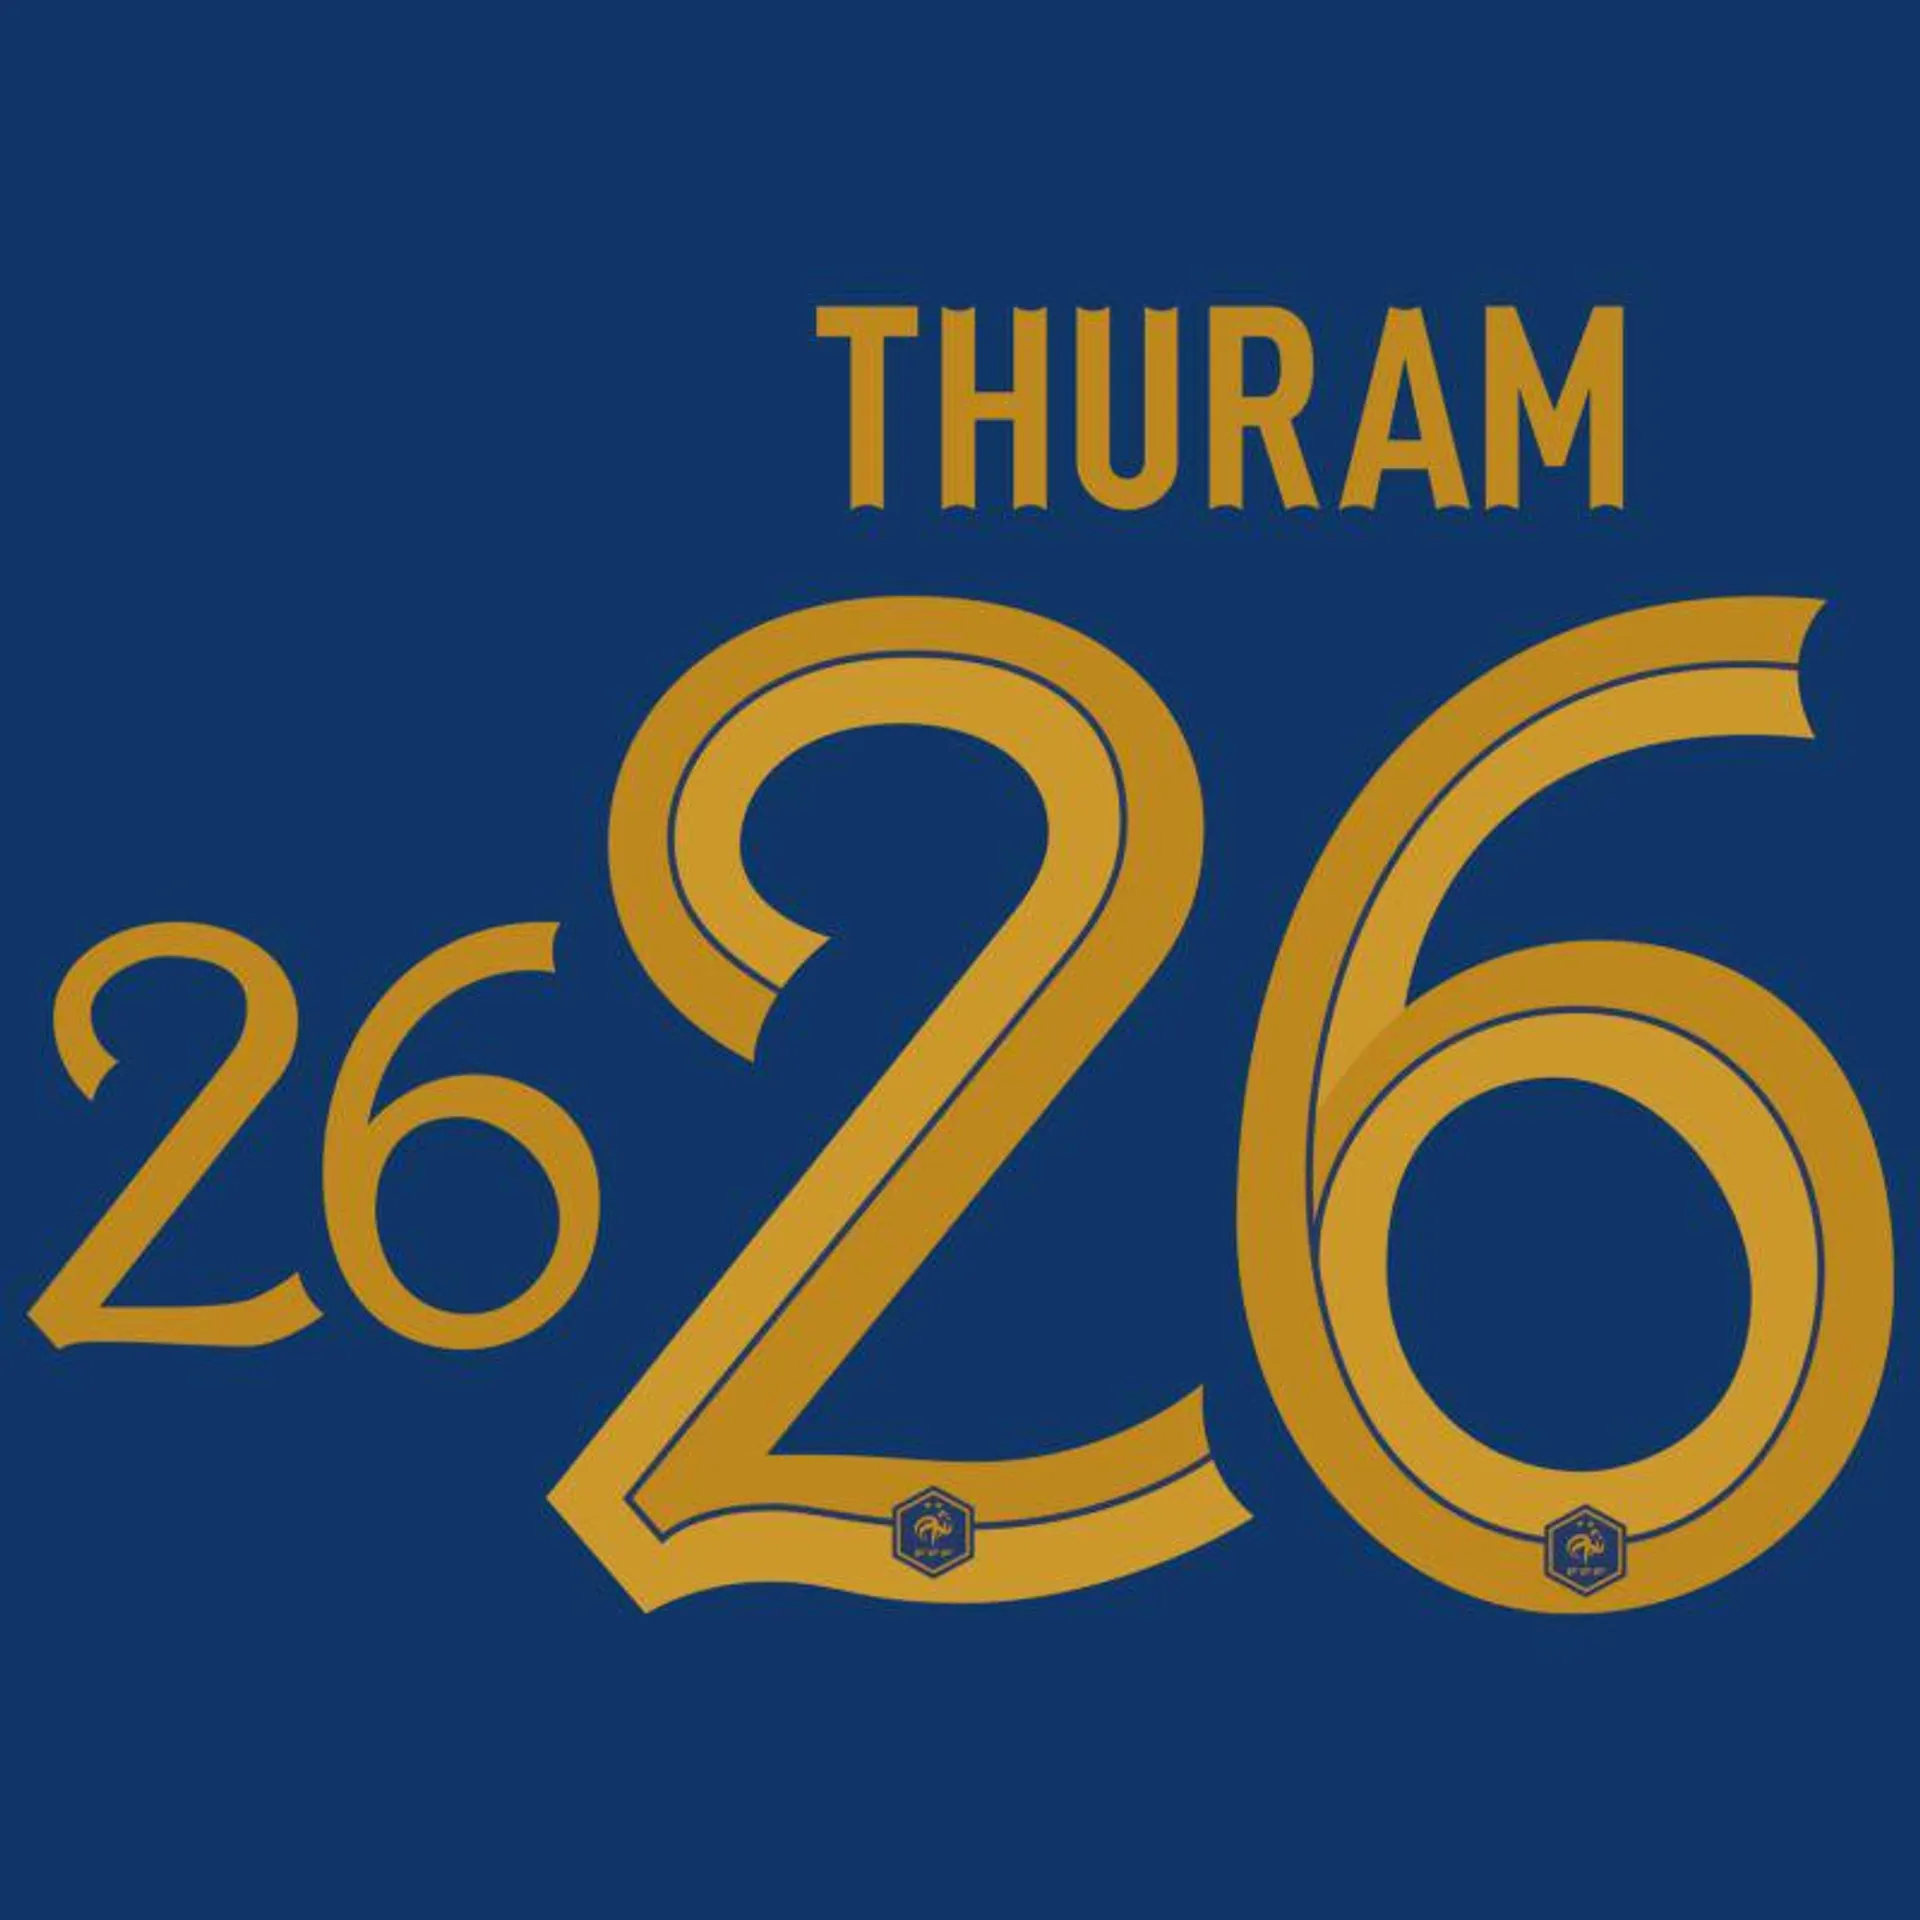 Thuram 26 (Official Printing) - 22-23 France Home